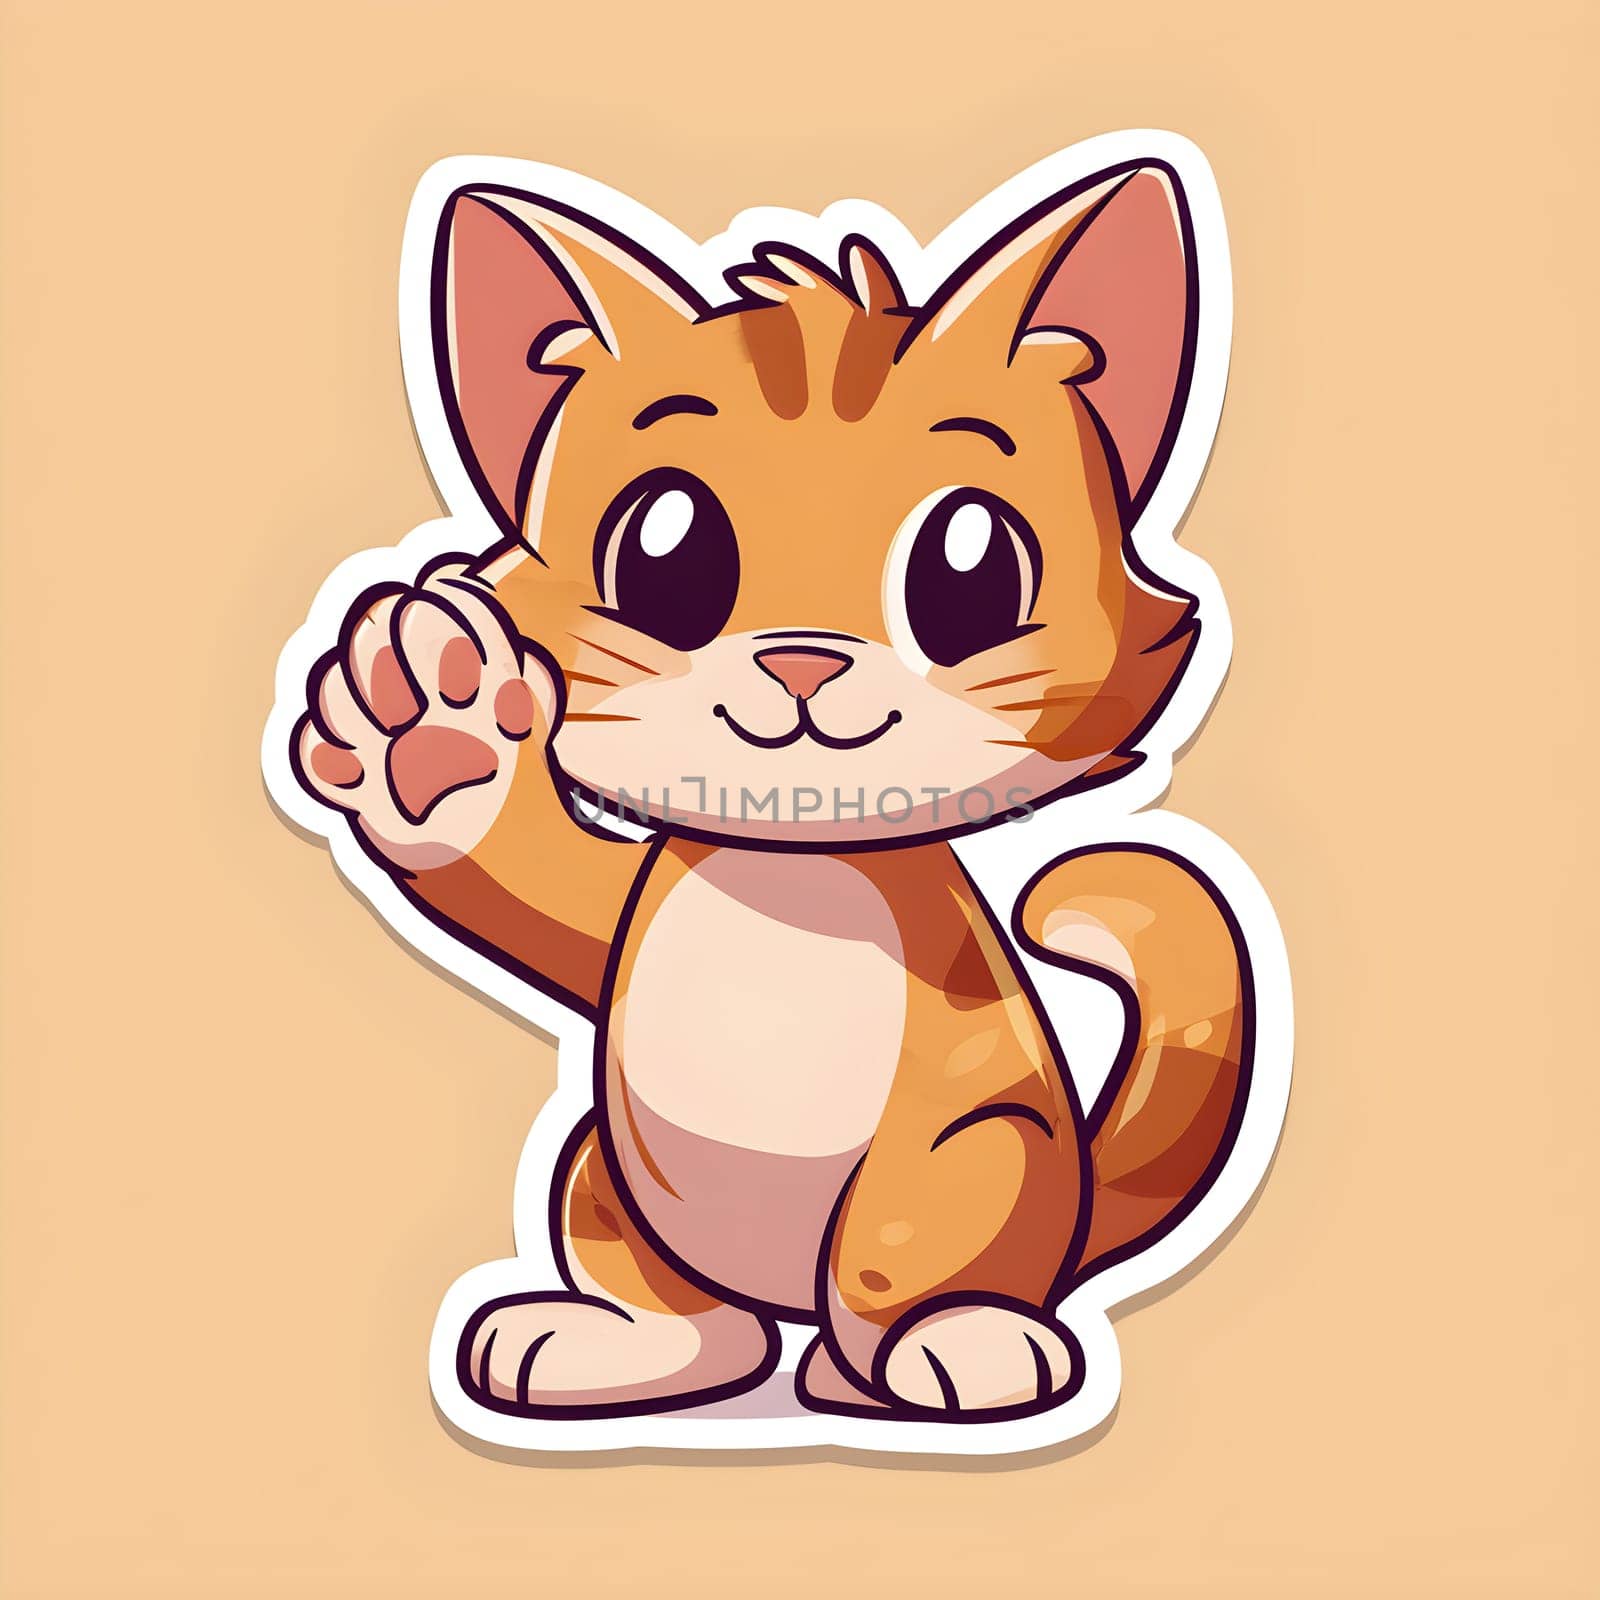 An adorable animated cat character with orange and white fur waves its paw in a friendly greeting by chrisroll